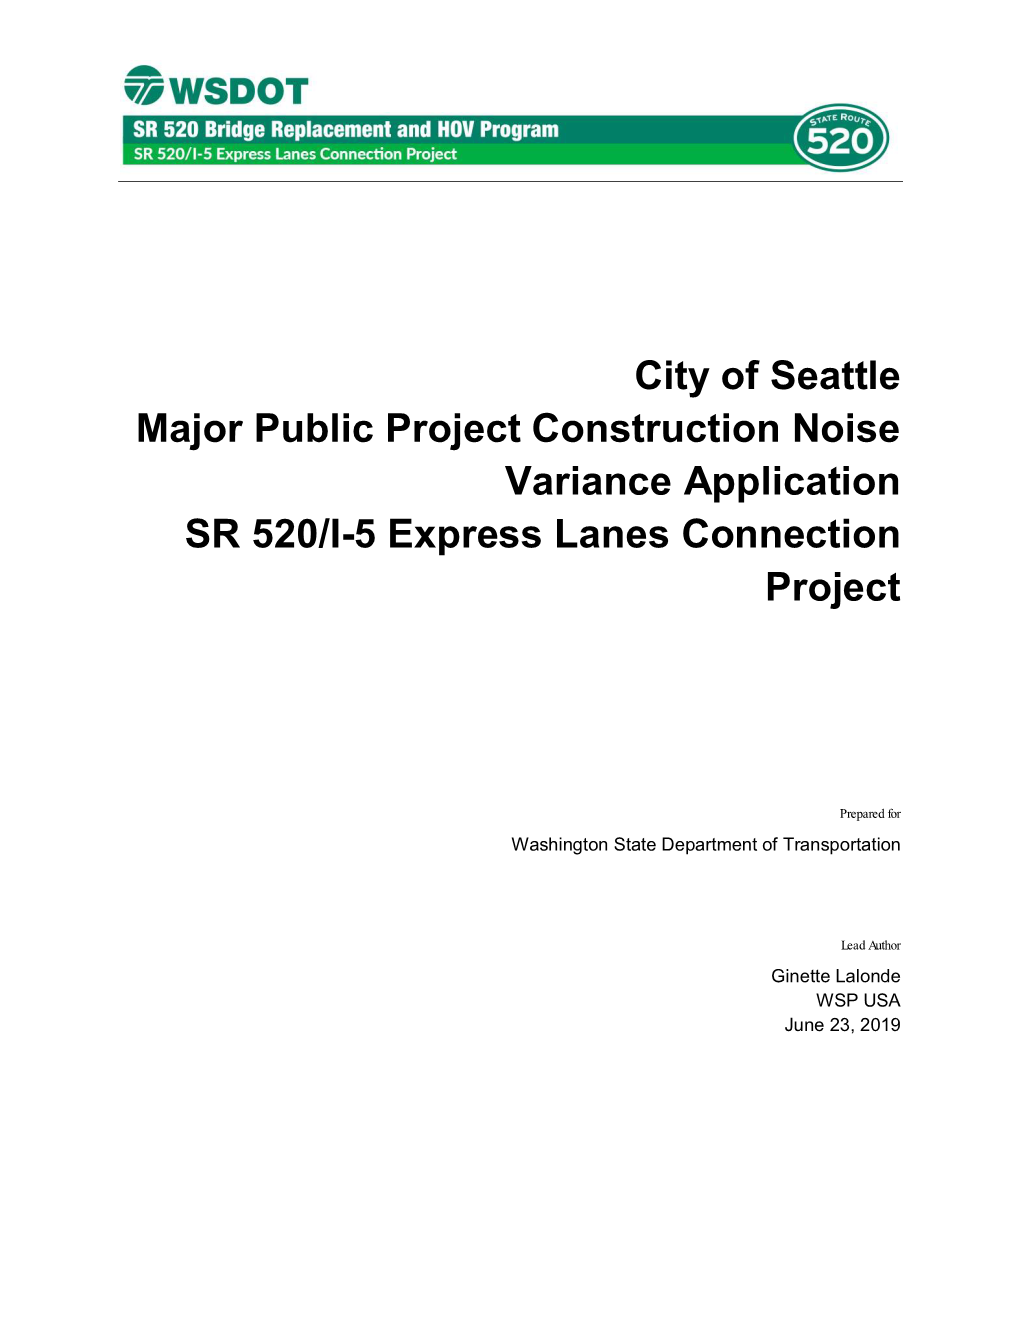 SR 520/I-5 Express Lanes Connection Project City of Seattle Major Public